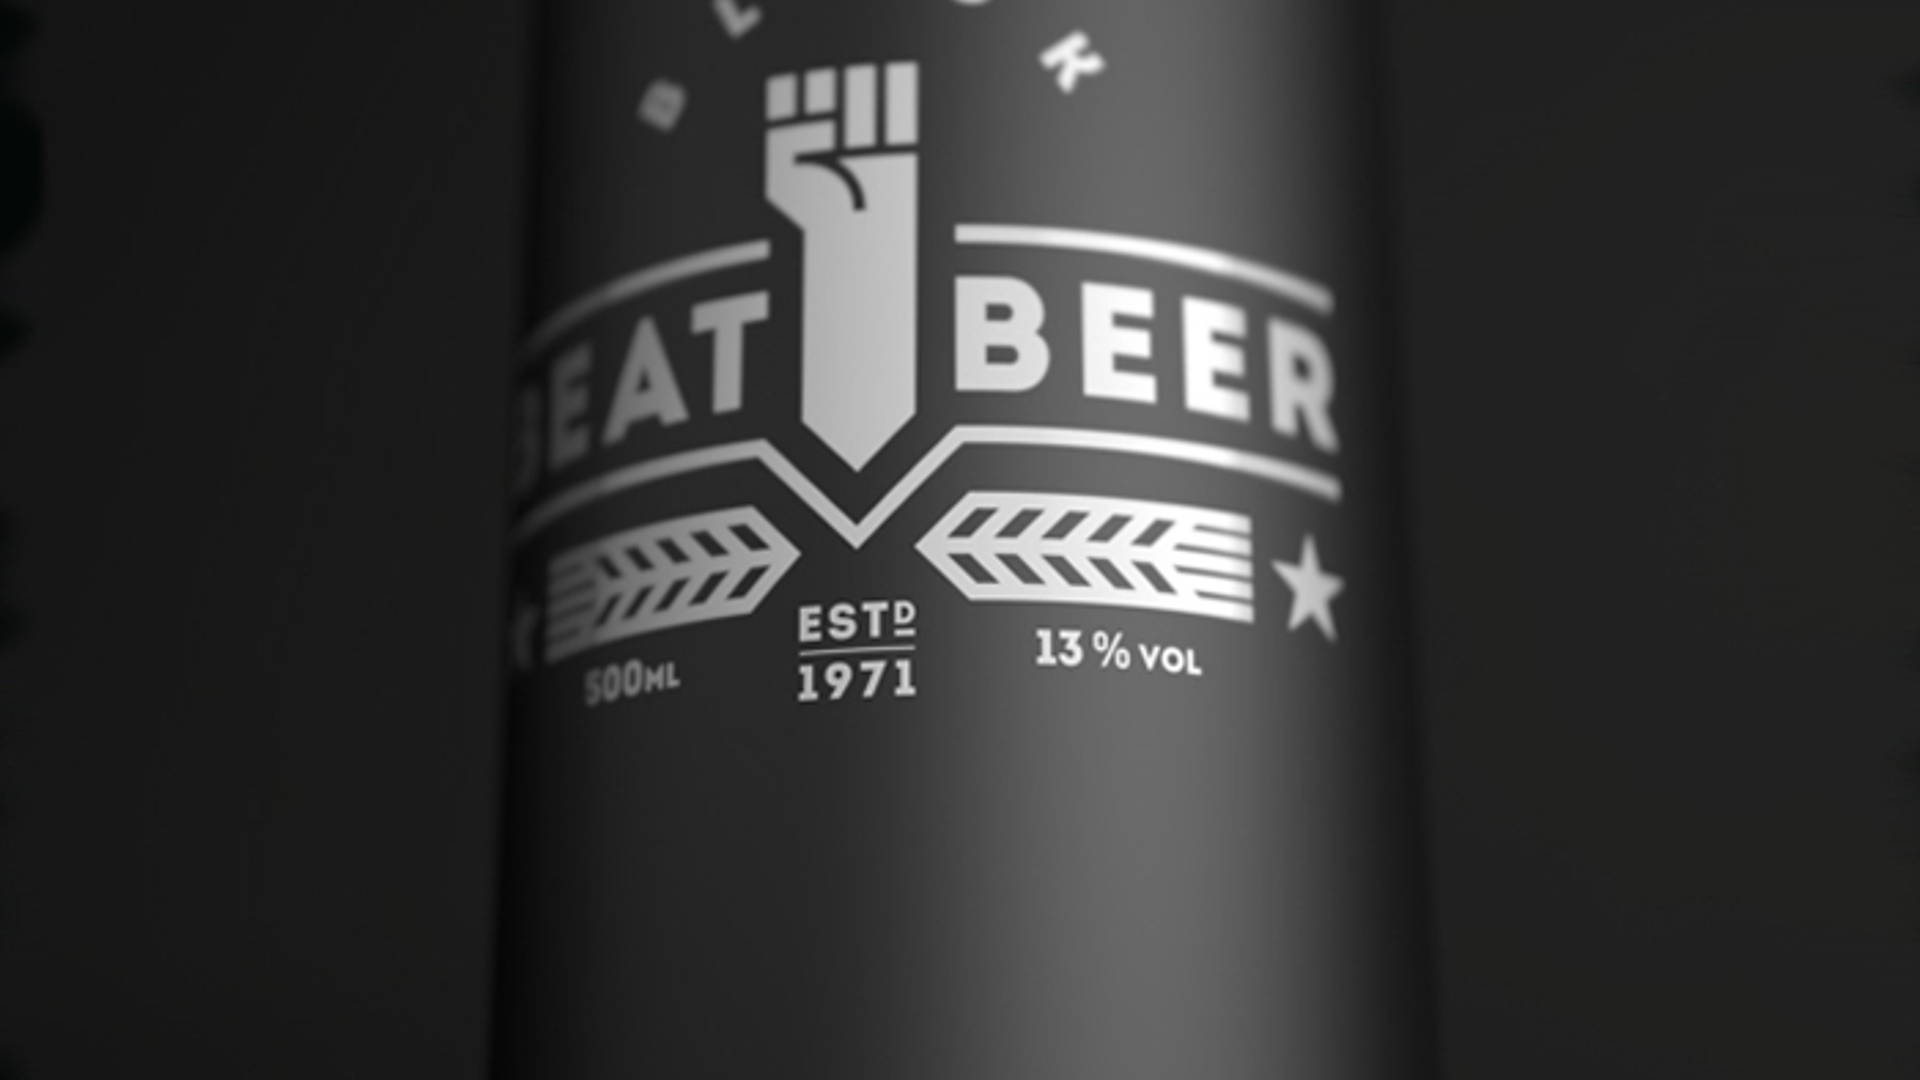 Featured image for Beat Beer